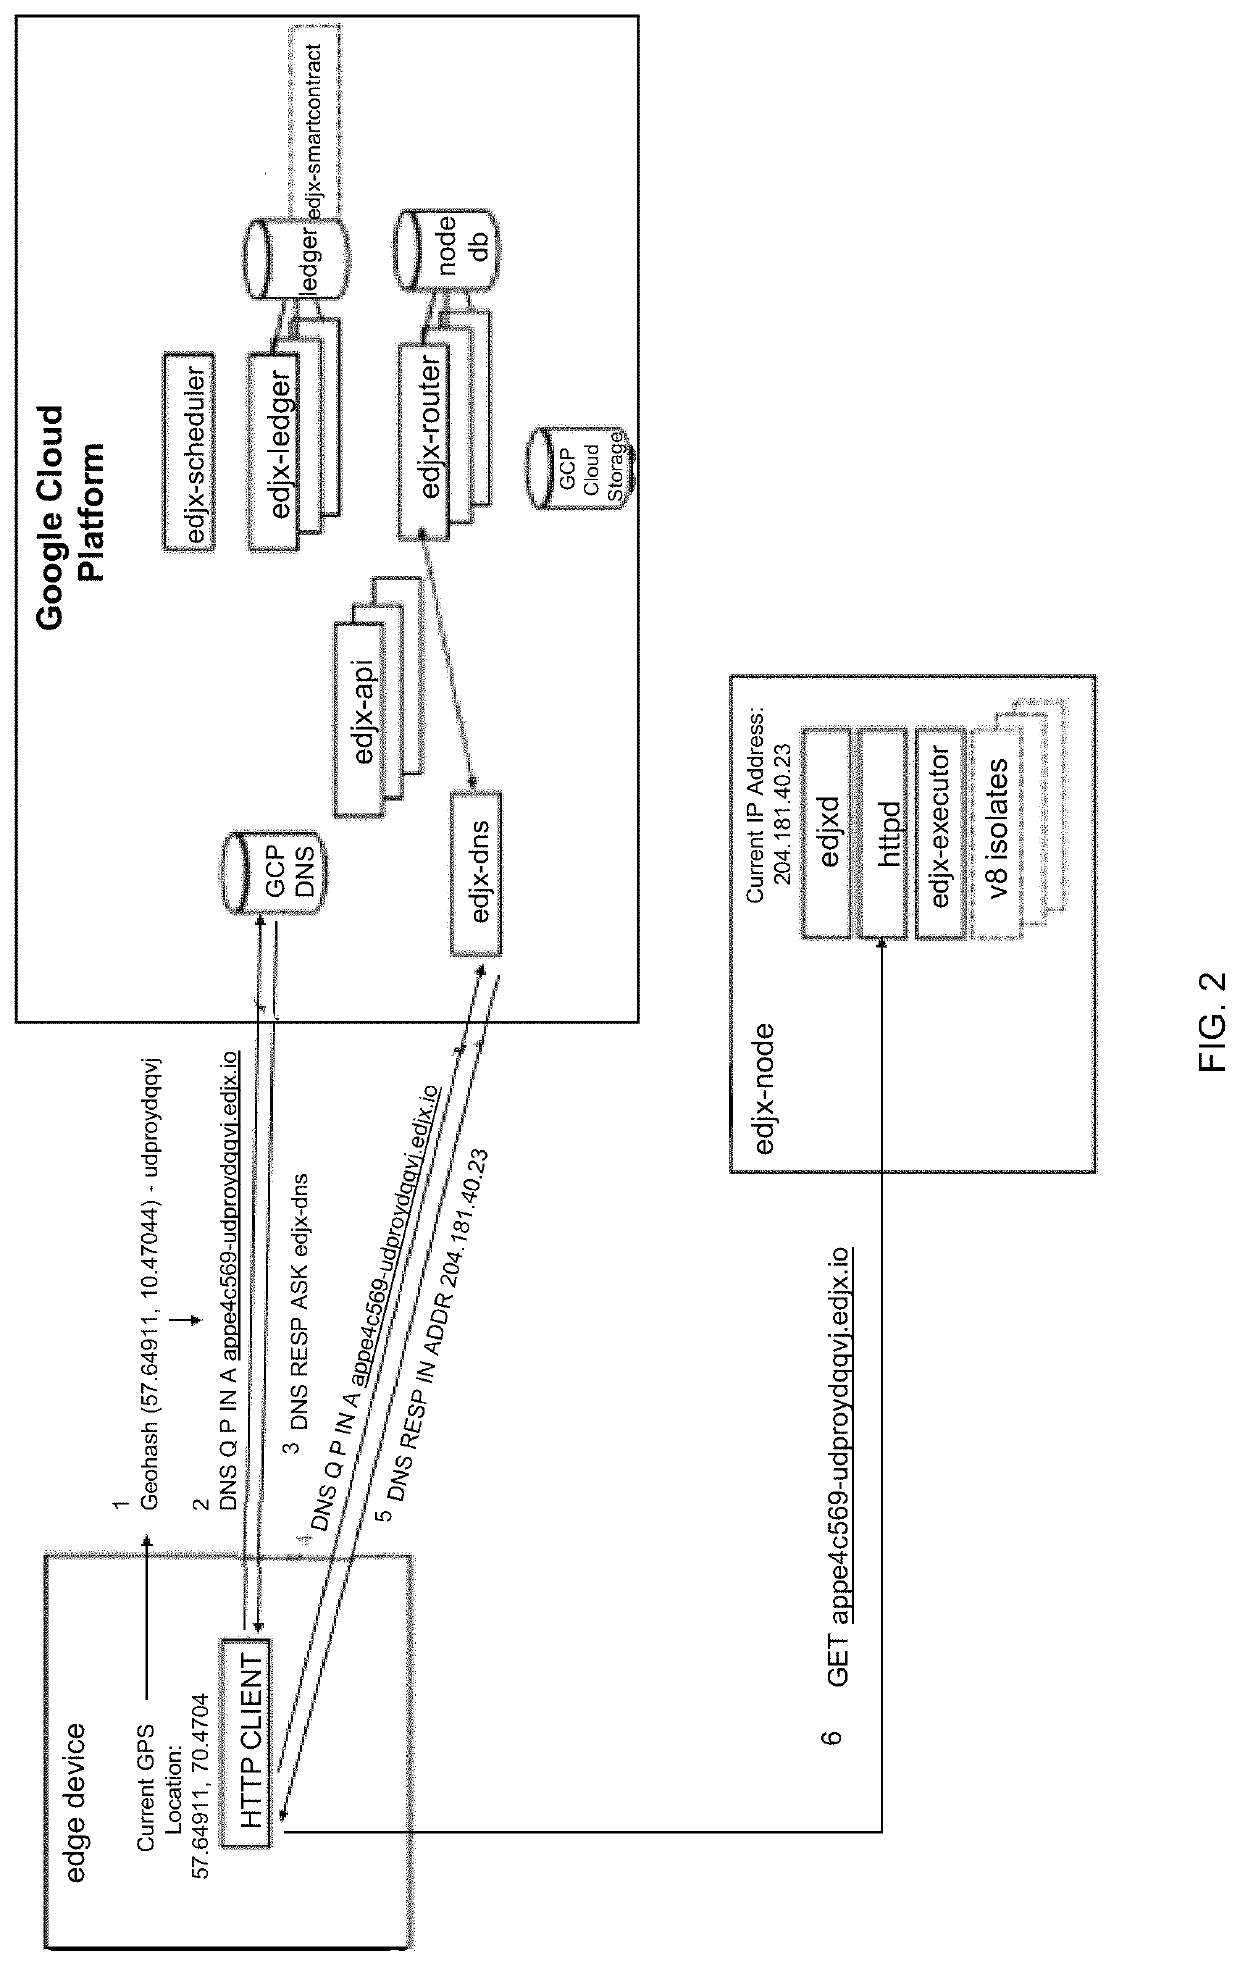 Systems and methods for locating microserver nodes in proximity to edge devices using georouting